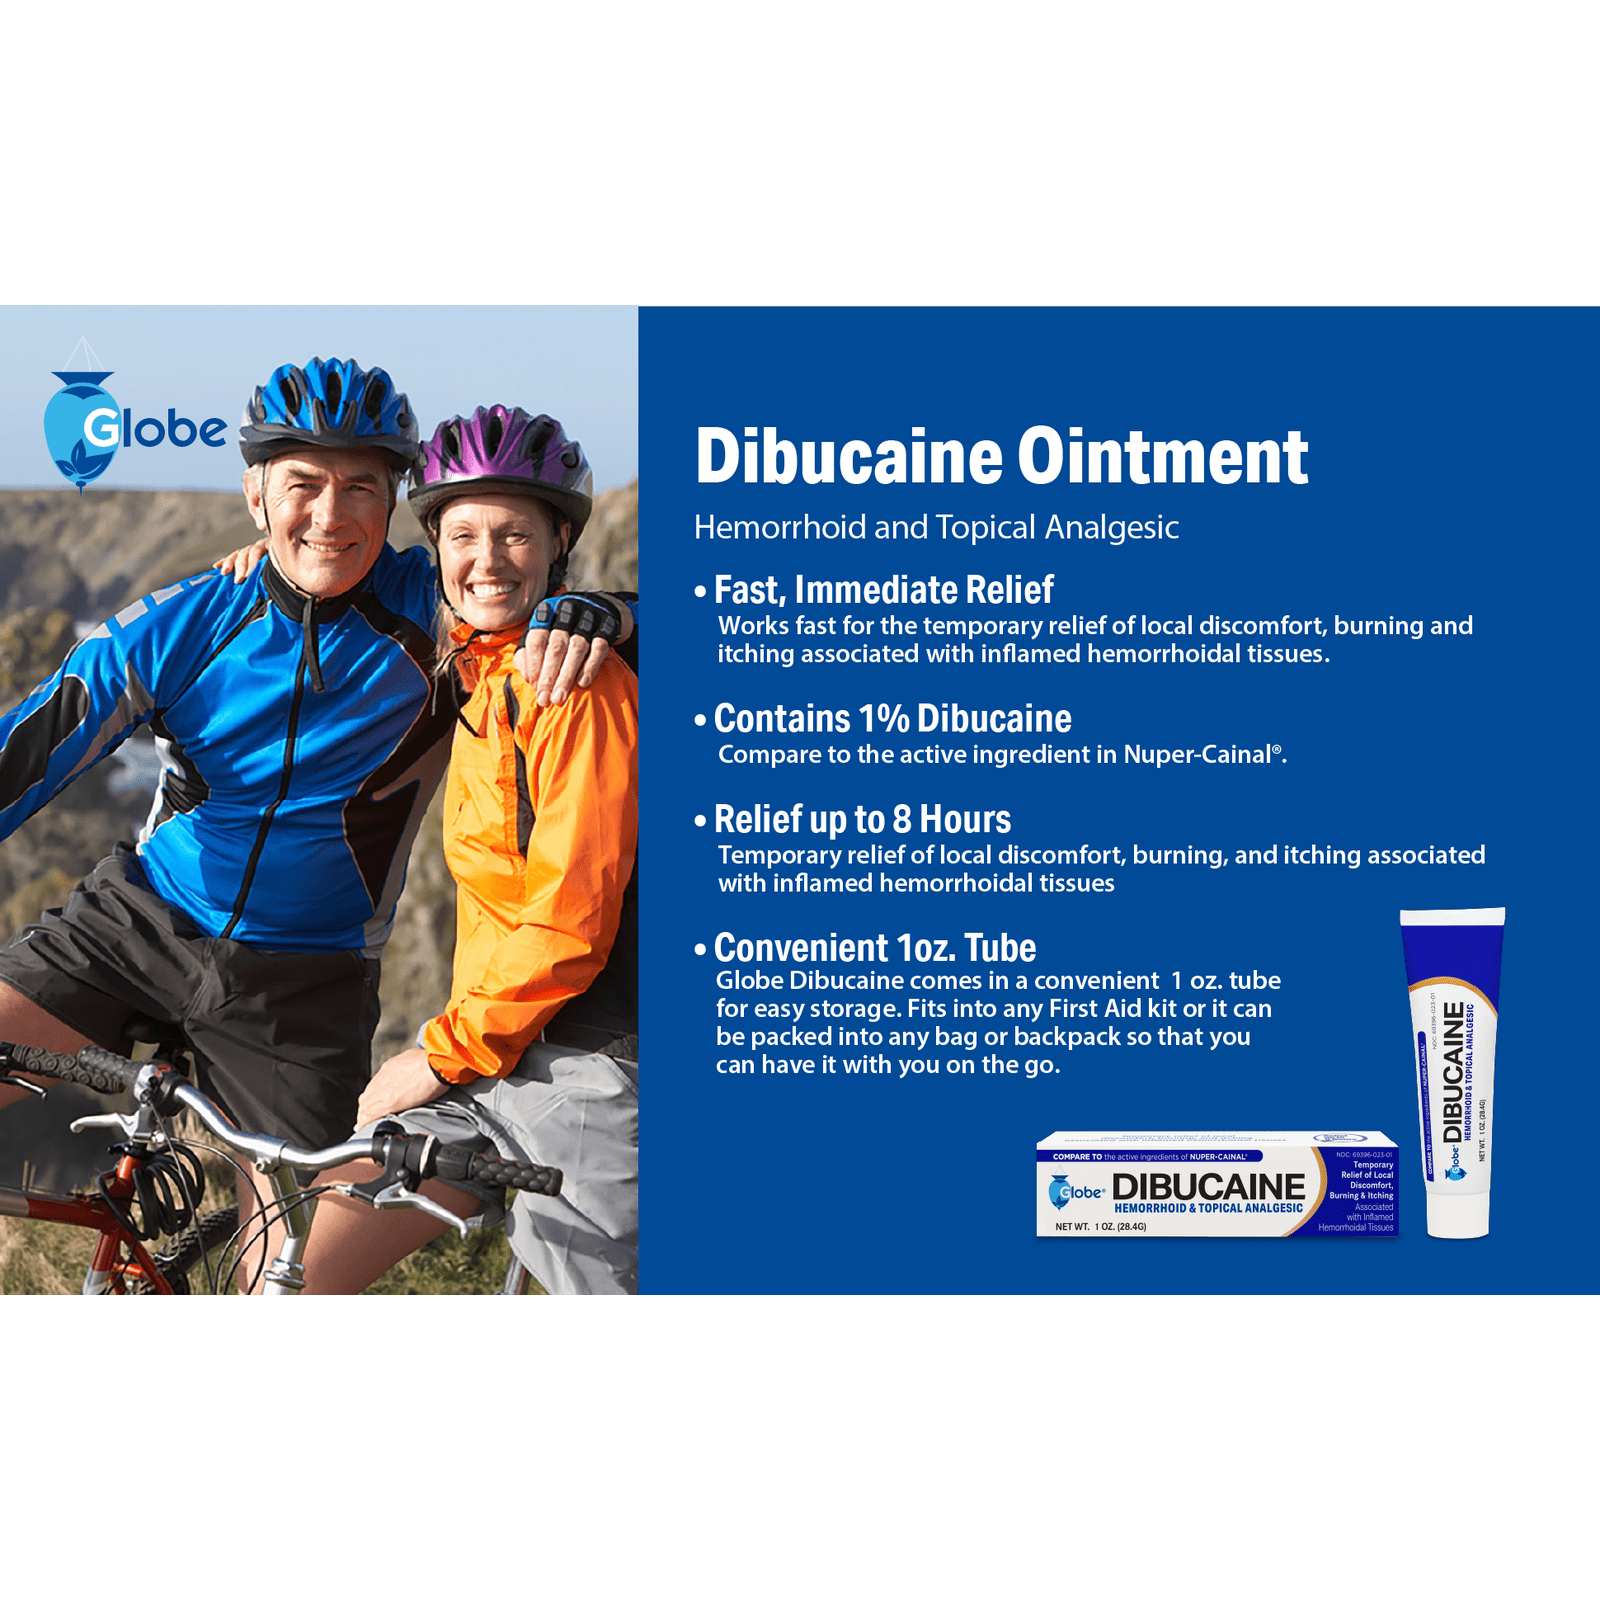 Globe Dibucaine 1% Hemorrhoid Treatment Ointment - 1 Oz Rapid Numbing Relief, Hemorrhoid Treatment from Pain, Itch and Burn